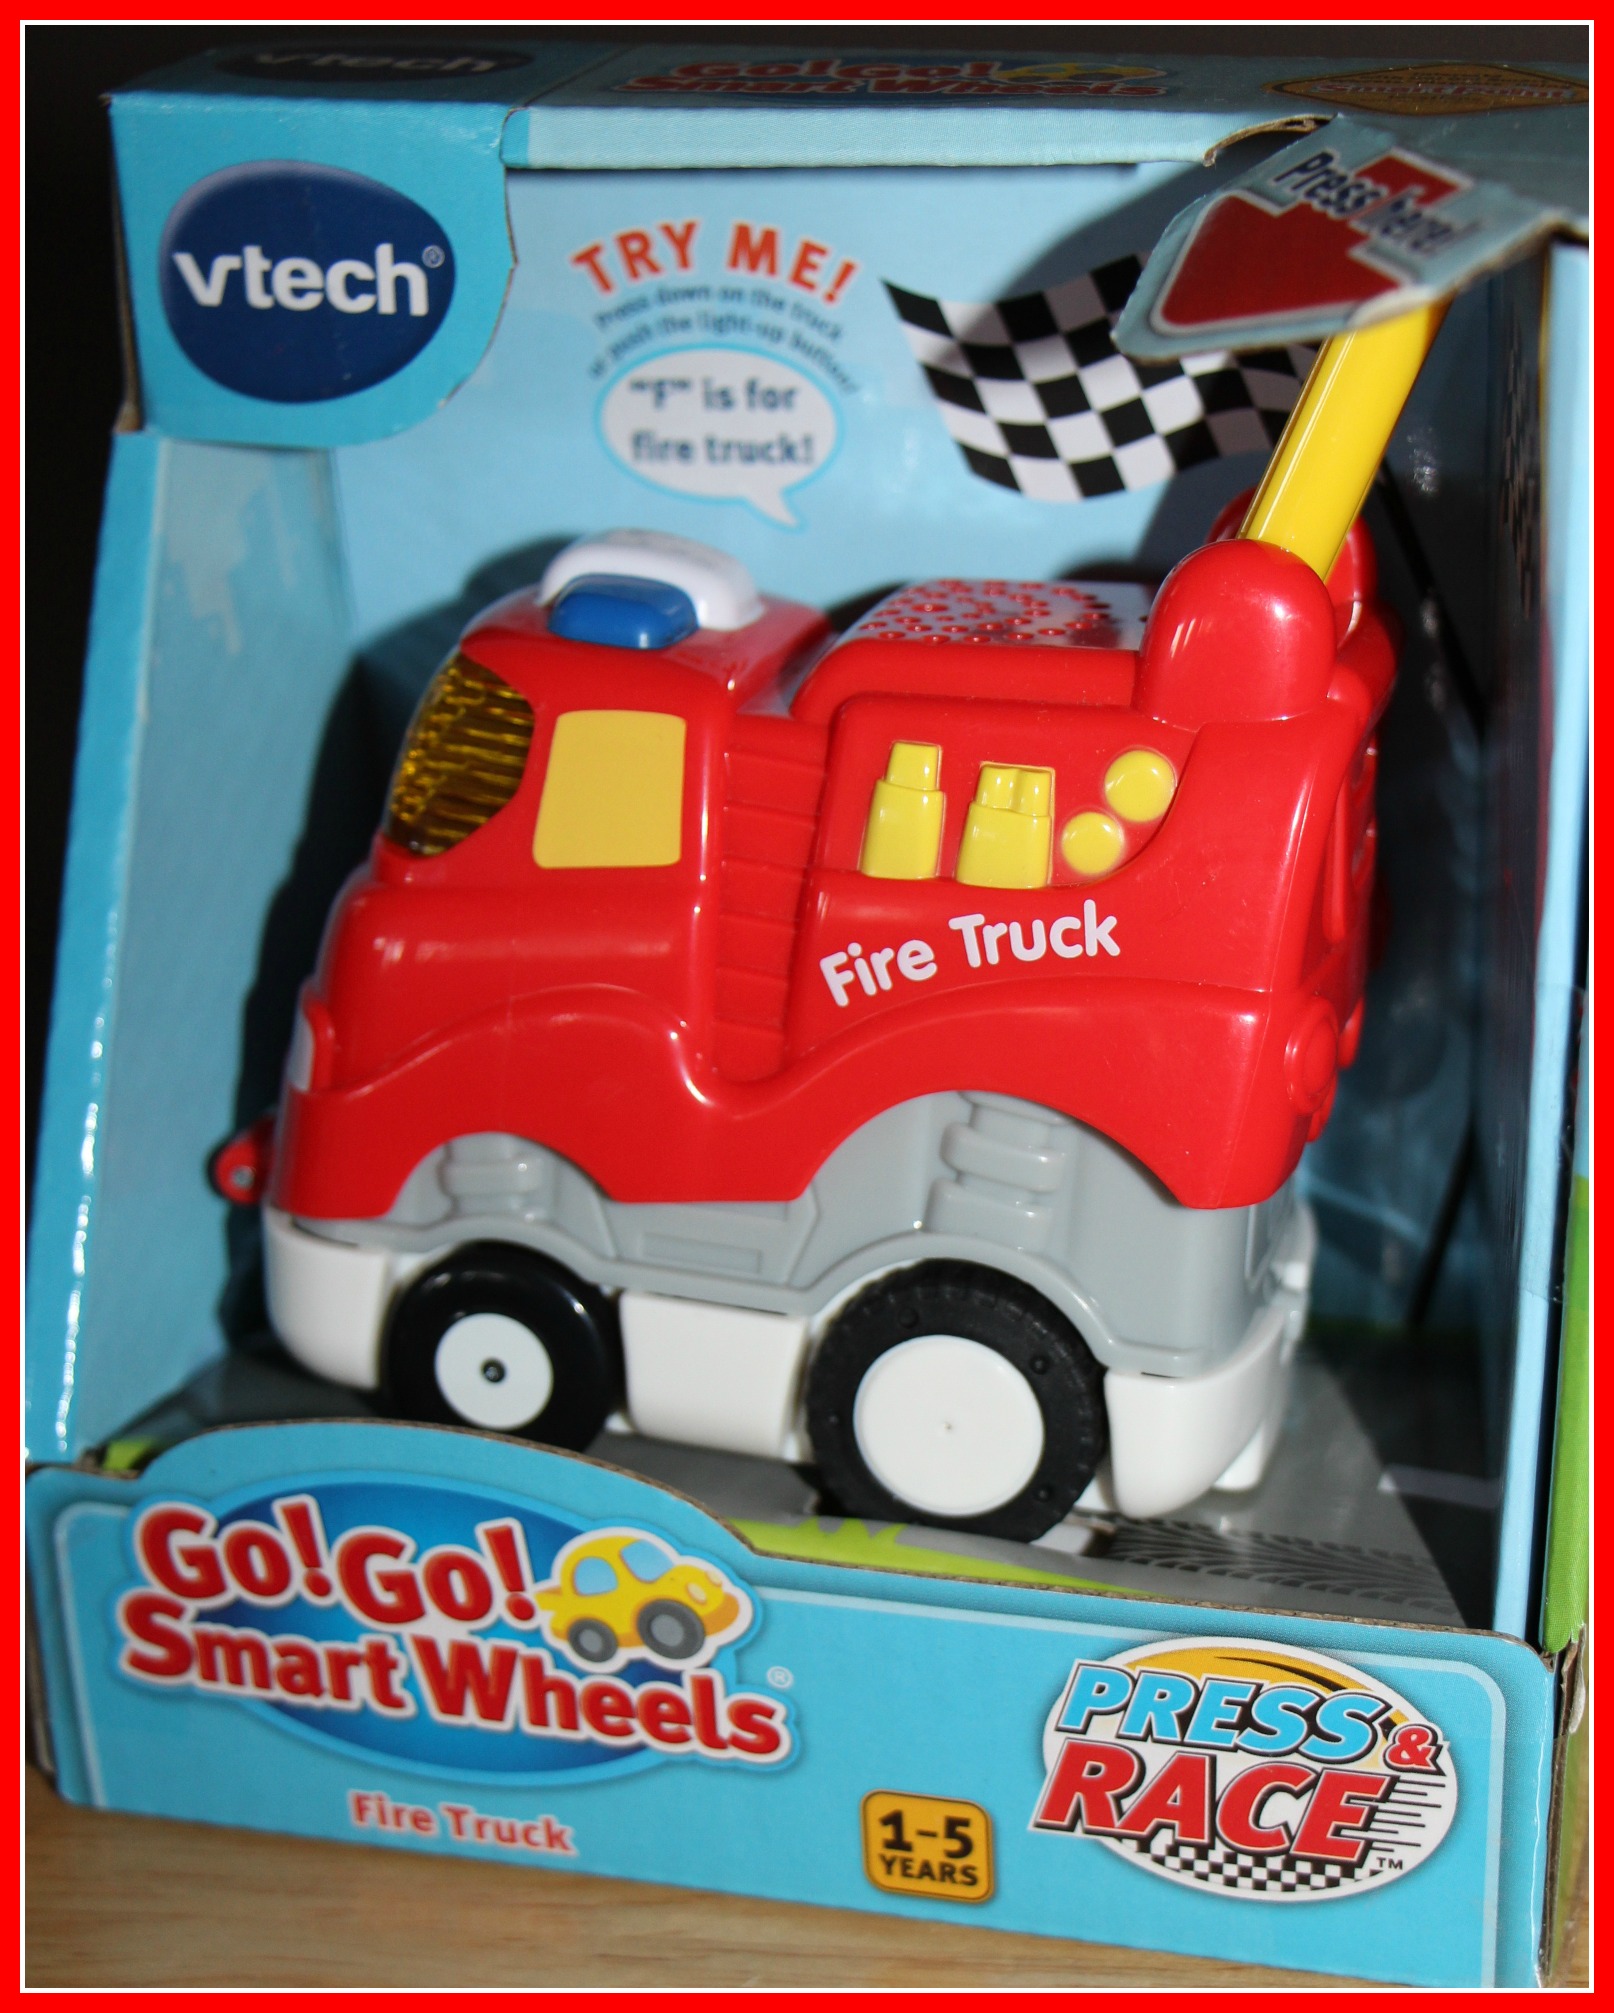 Get On The Move with Go! Go! Smart Wheels from VTech